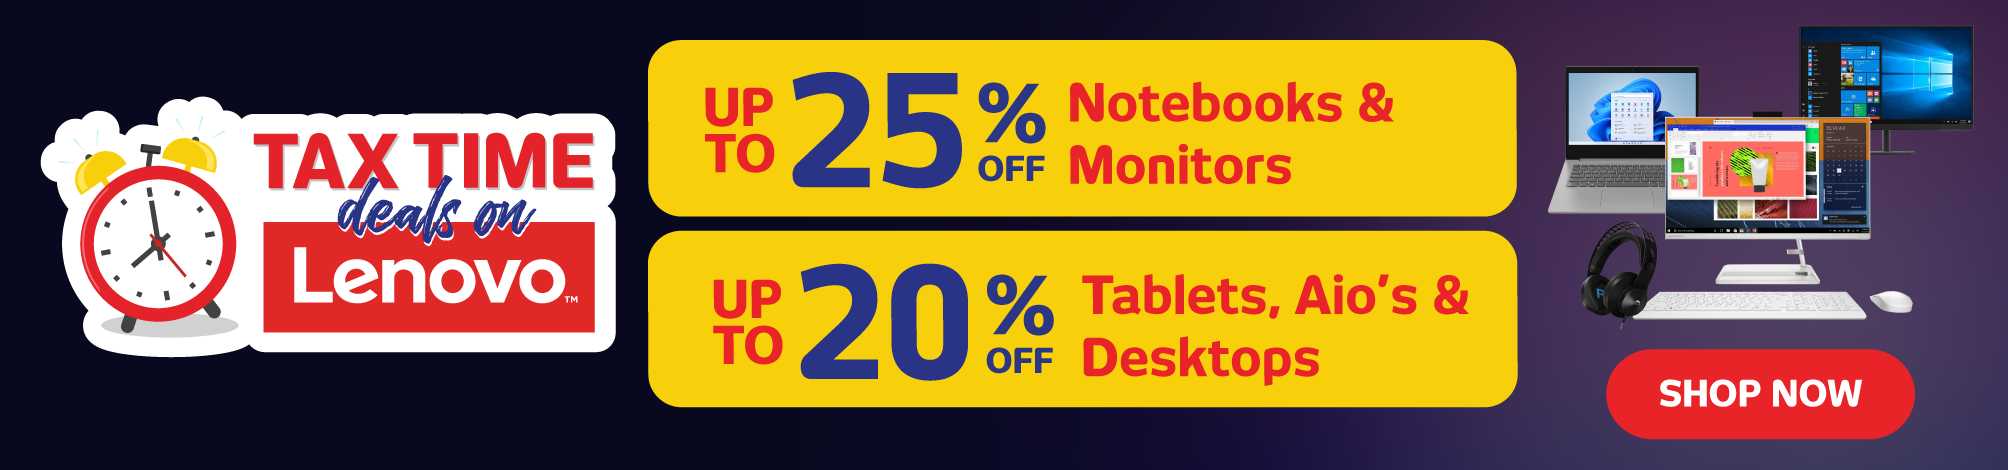 Up To 25% Off Lenovo Notebooks, Monitors & Up To 20% off Tablets, AiO’s & Desktops